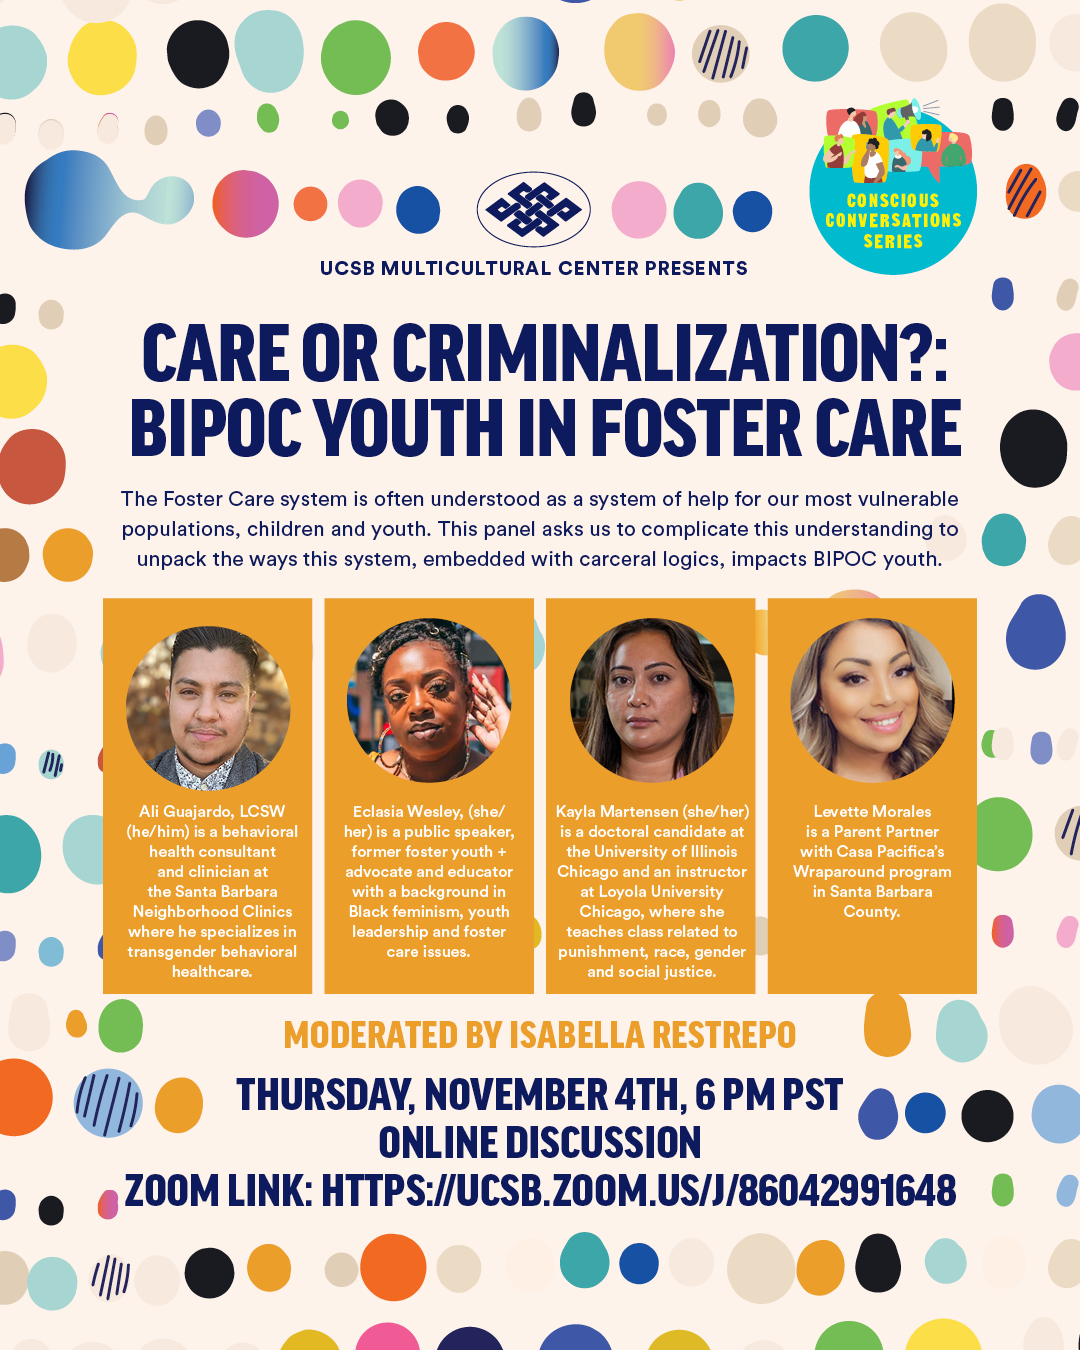 BIPOC Youth in Foster Care